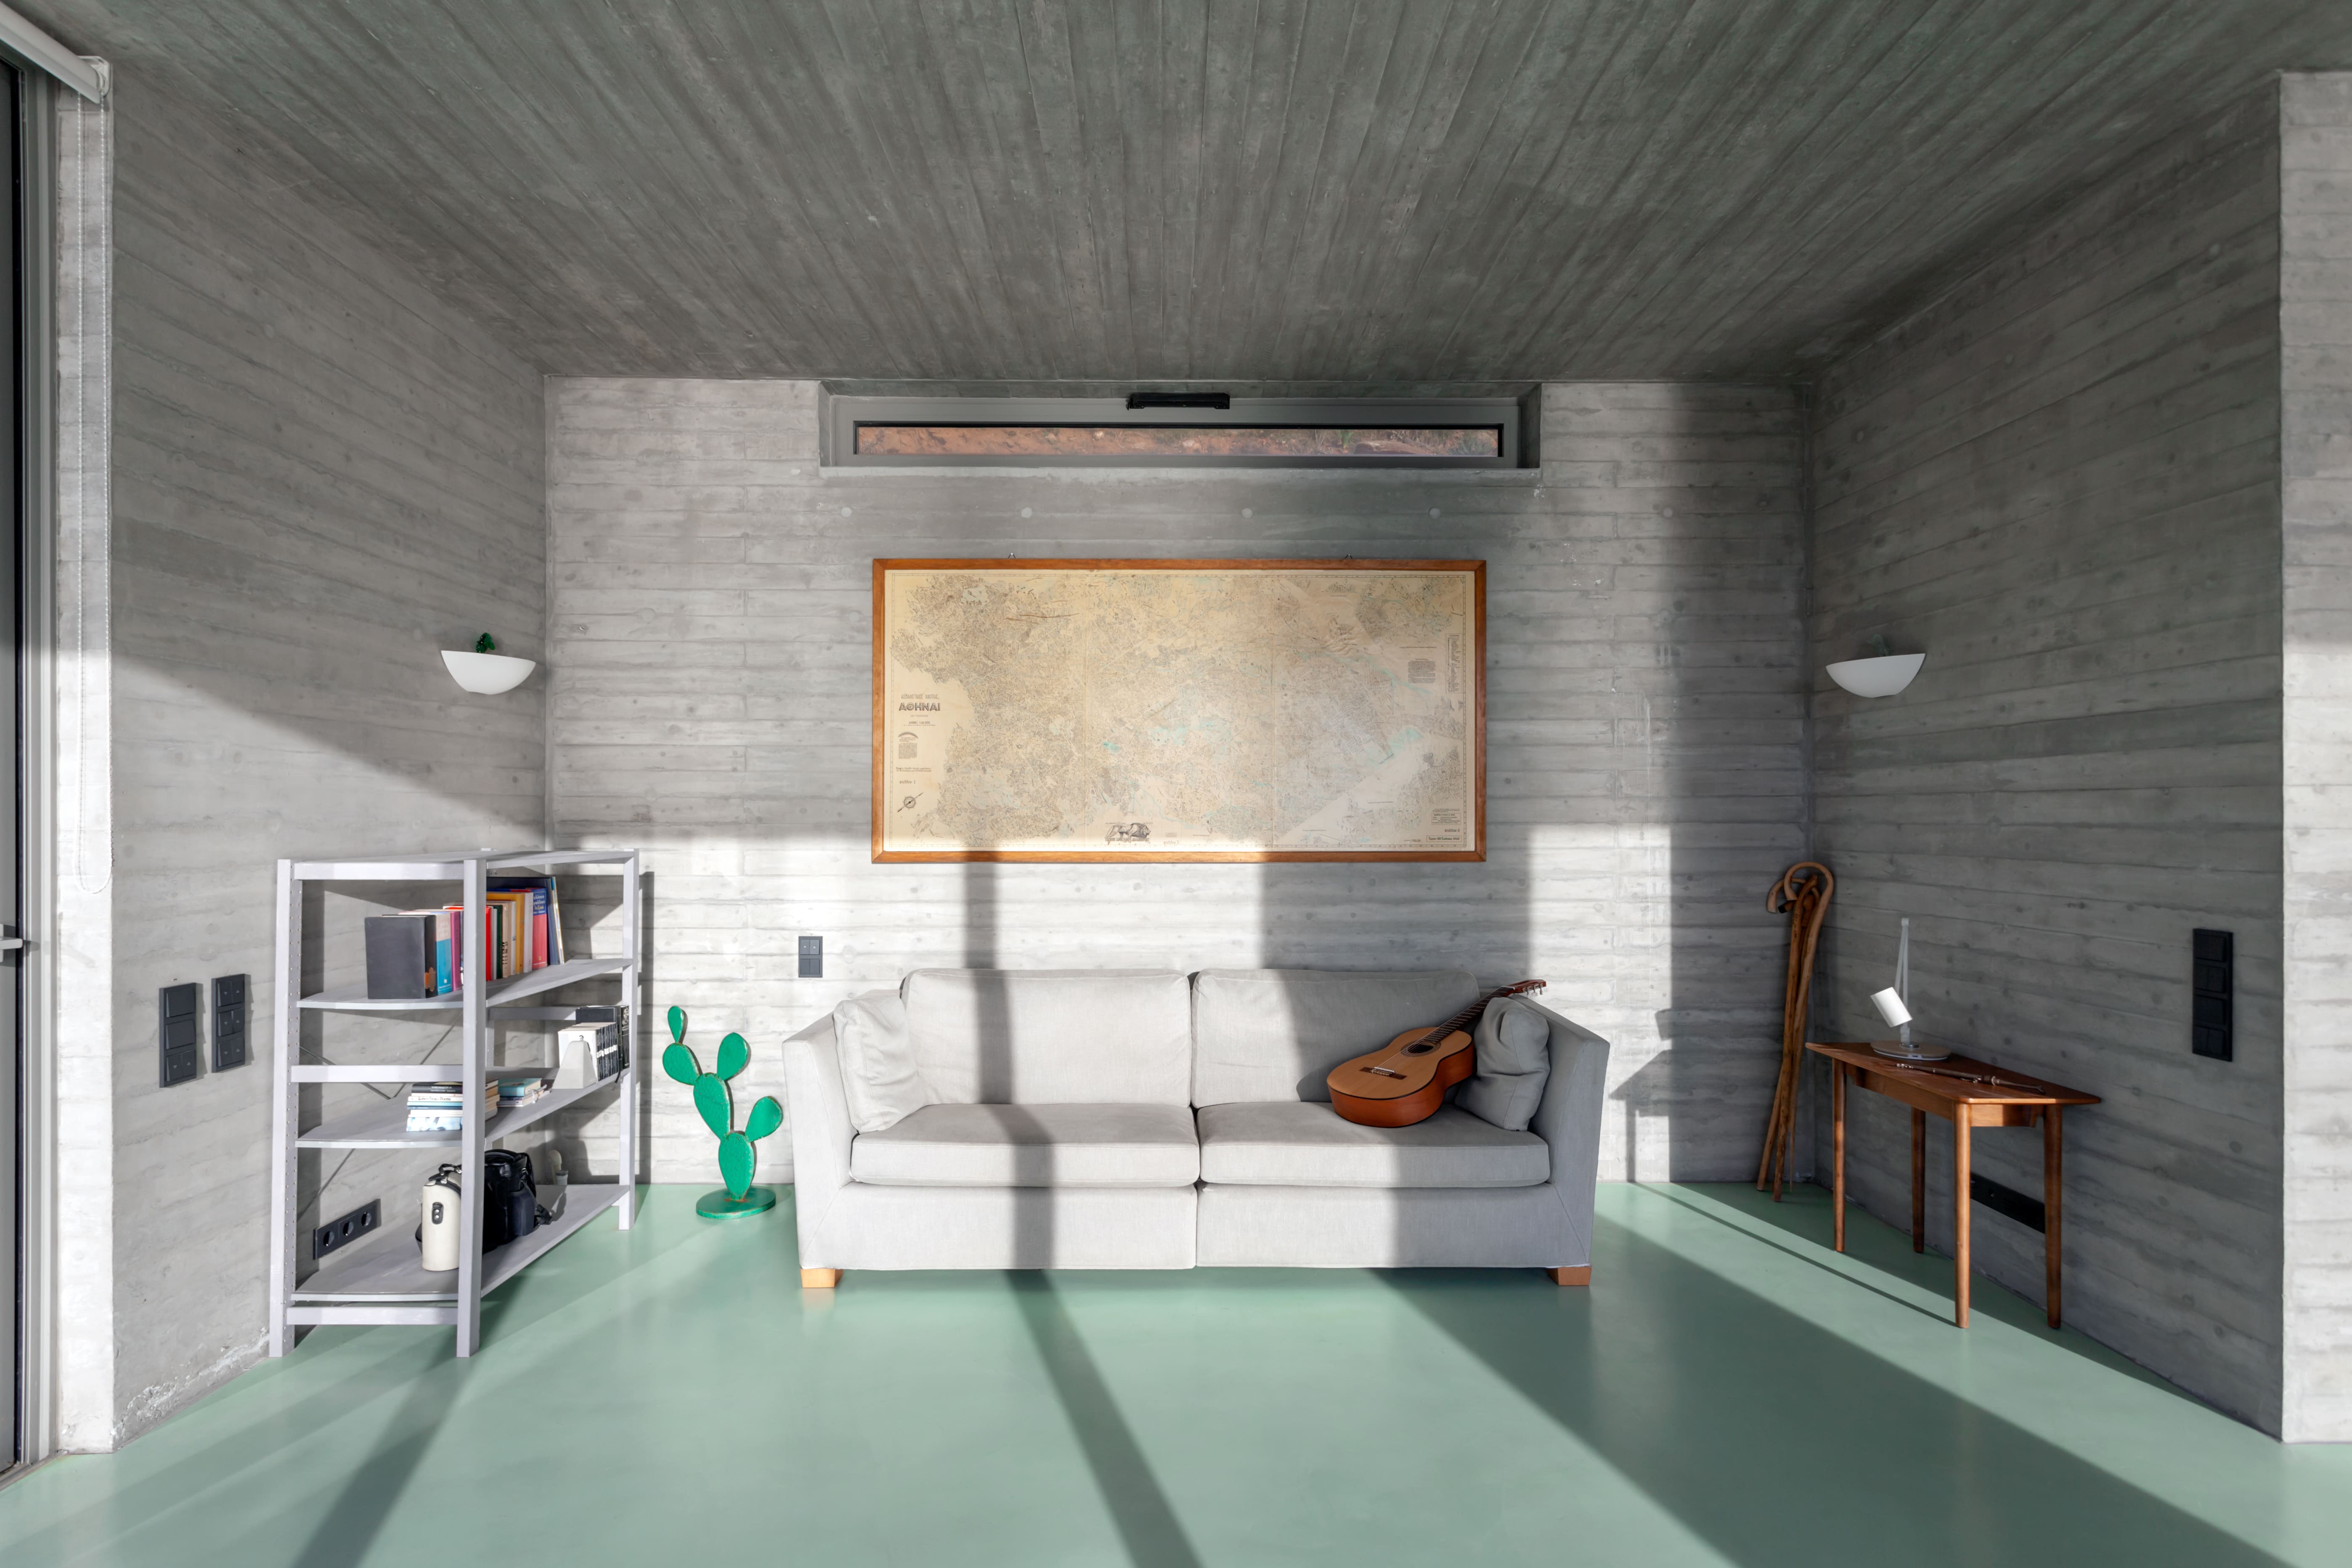 The selected furniture matches the exposed concrete color, bringing the room to life